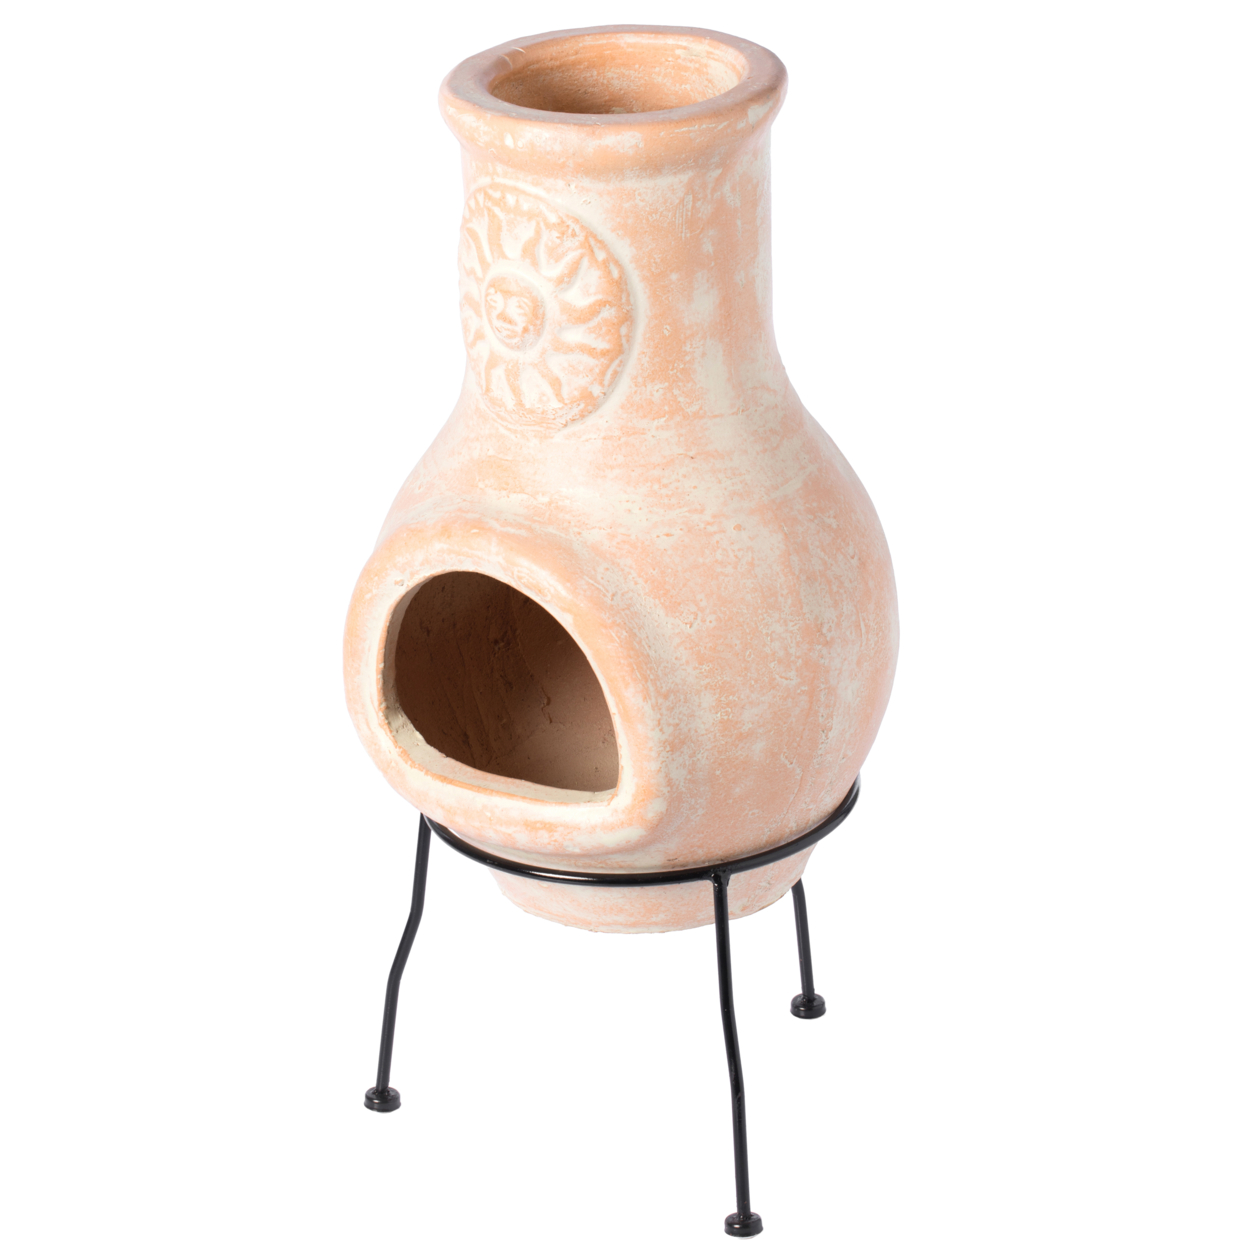 Outdoor Beige Clay Chiminea Outdoor Fireplace Sun Design Charcoal Burning Fire Pit With Sturdy Metal Stand, Barbecue, Cocktail Party